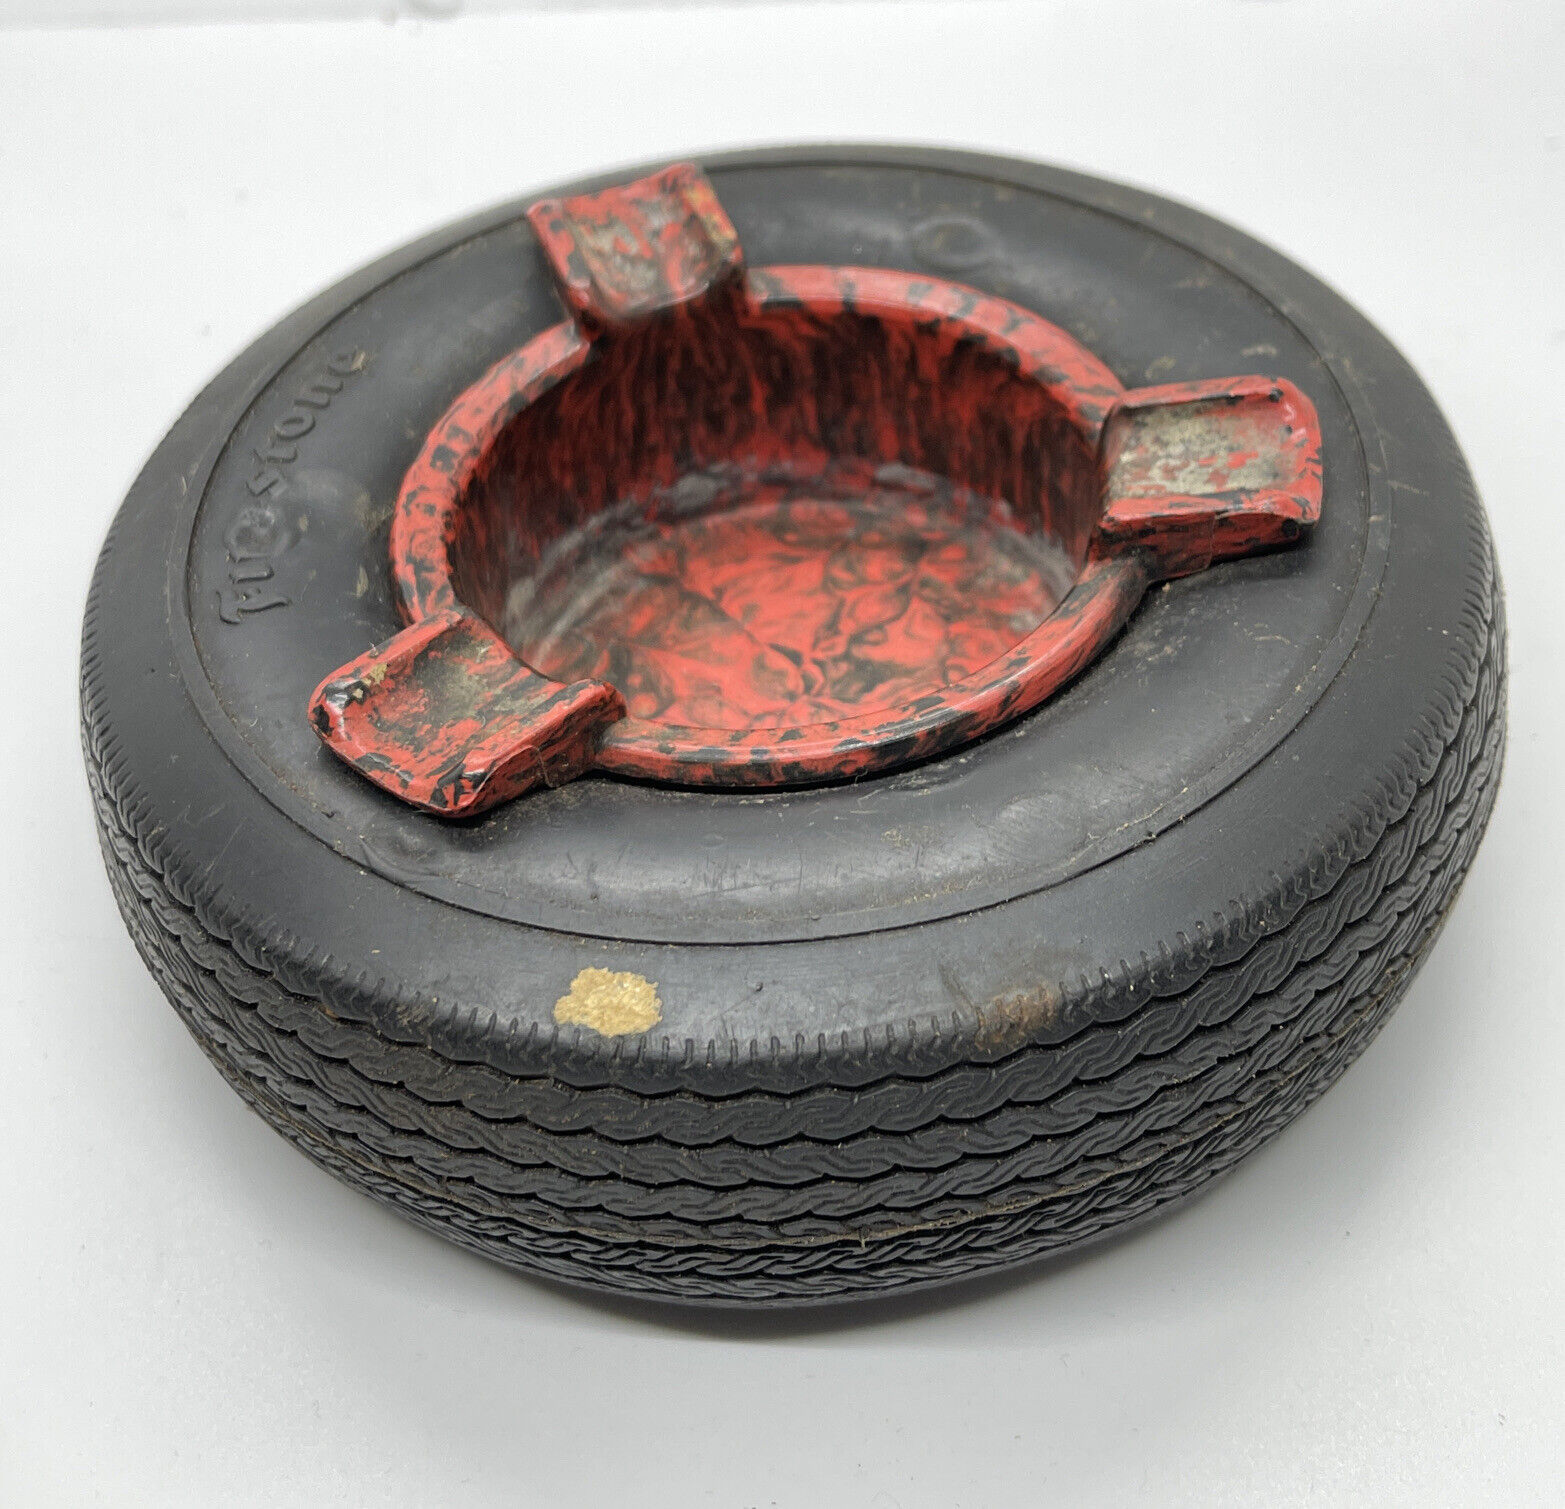 Firestone Tires Vintage Ashtray Black Rubber w/ Red Advertising USA Ash Tray